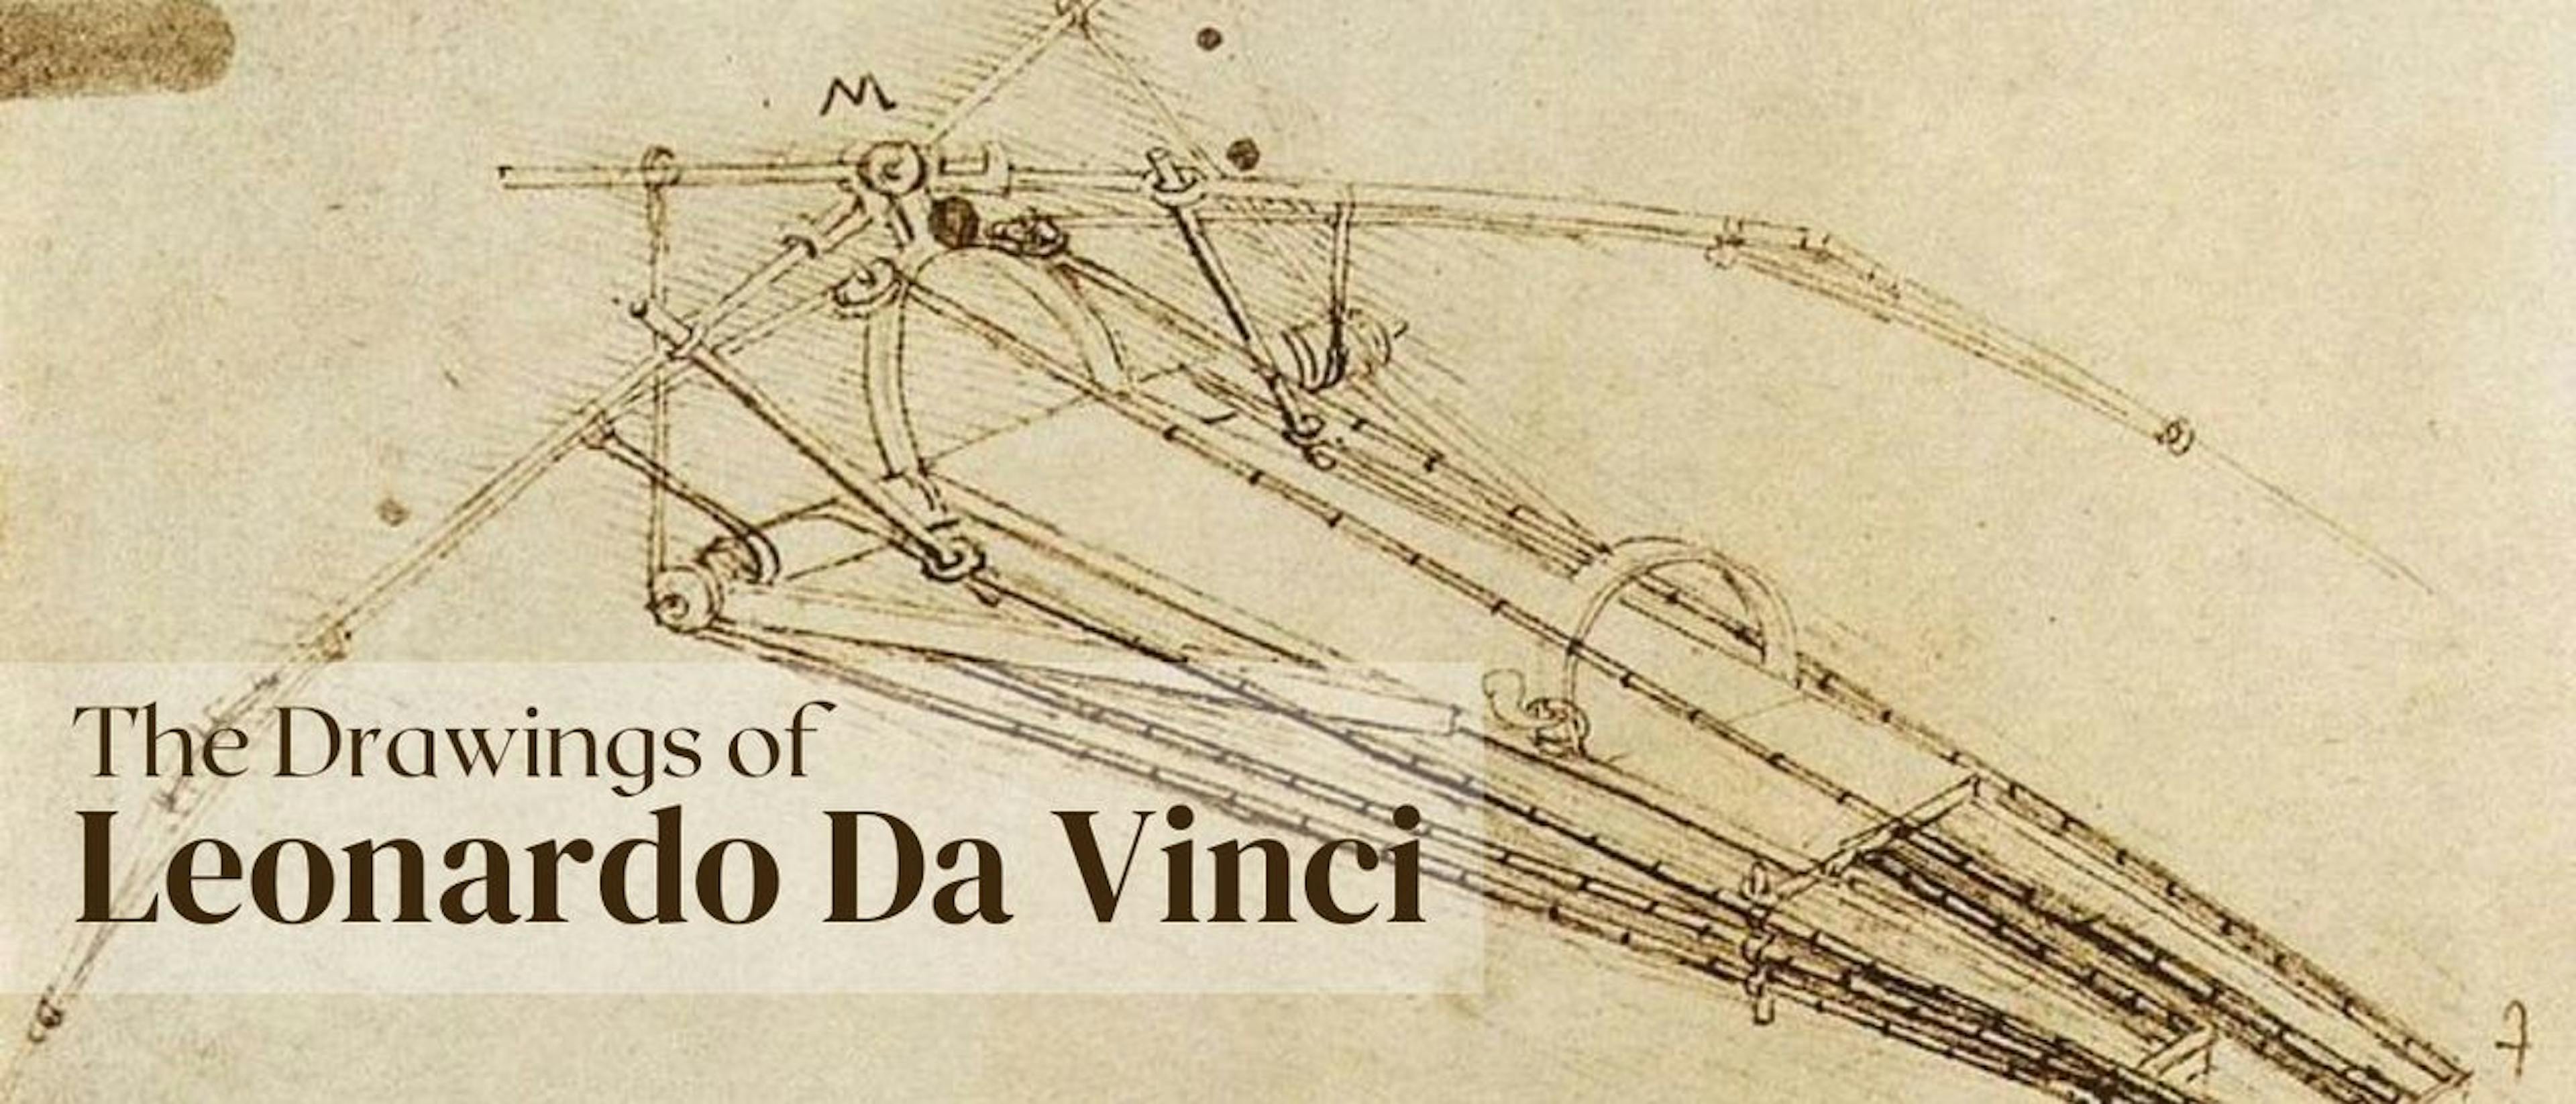 featured image - THE DRAWINGS OF LEONARDO DA VINCI BY C. LEWIS HIND